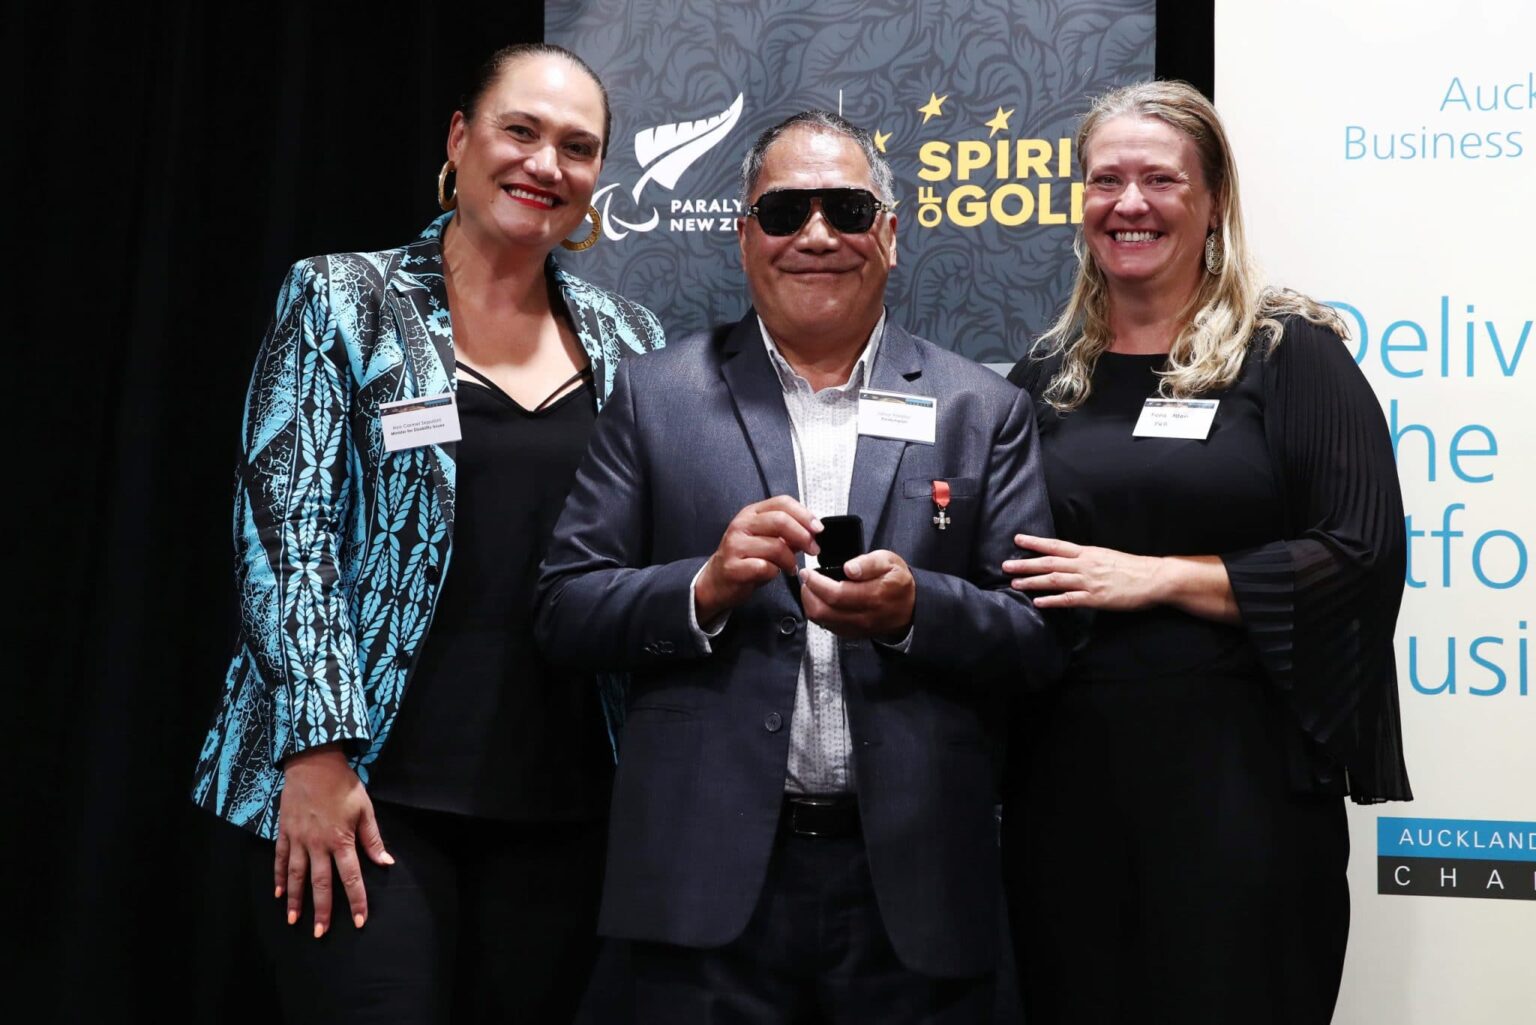 Paralympian Latoa Halatau receives his numbered paralympic pin by Fiona Allan and Minister for Disability Issues, Hon Carmel Sepuloni